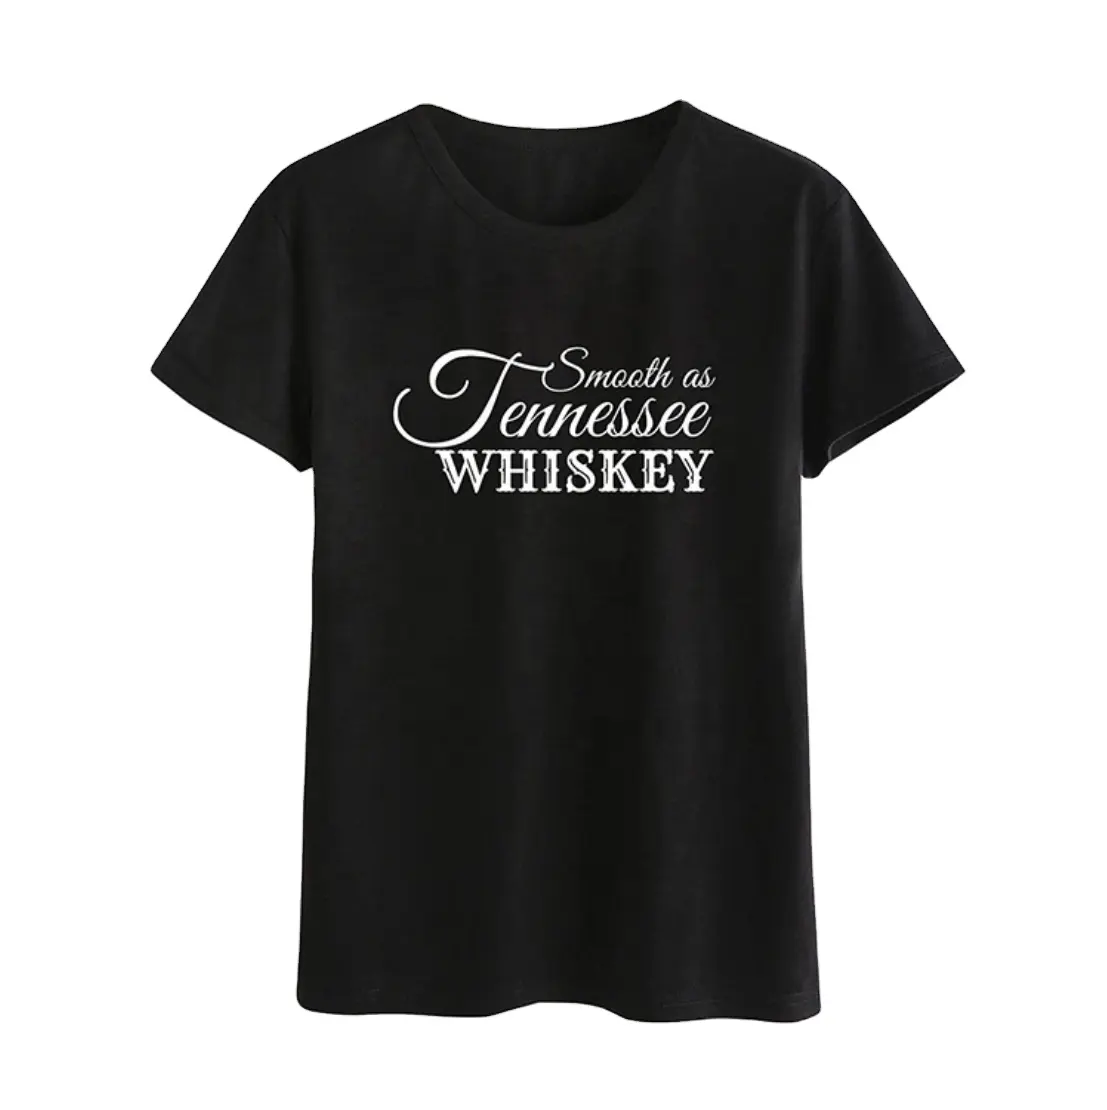 Smooth as Tennessee Whiskey Shirts for Women Funny Tee Shirts Letter Print Tee Shirts with Funny Sayings